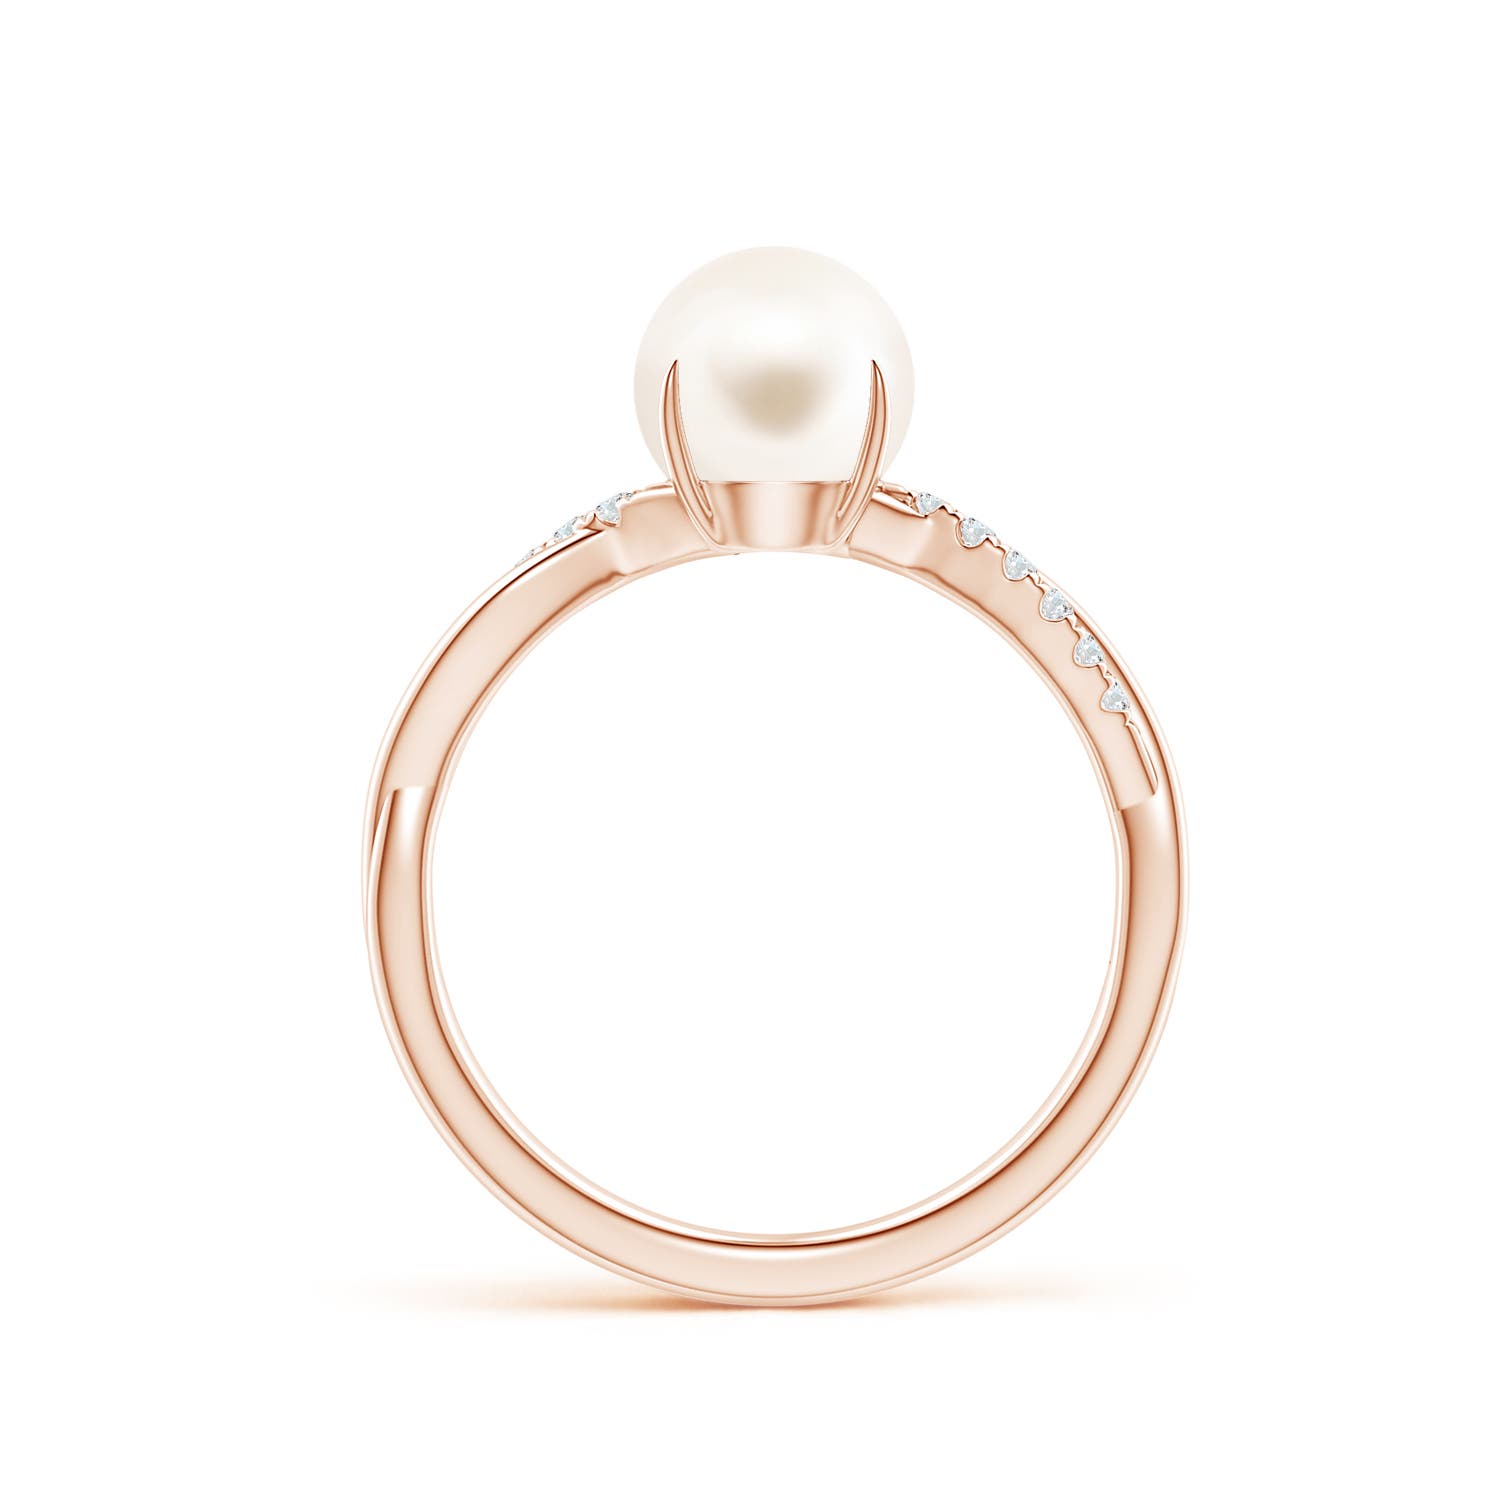 AAA / 2.6 CT / 14 KT Rose Gold